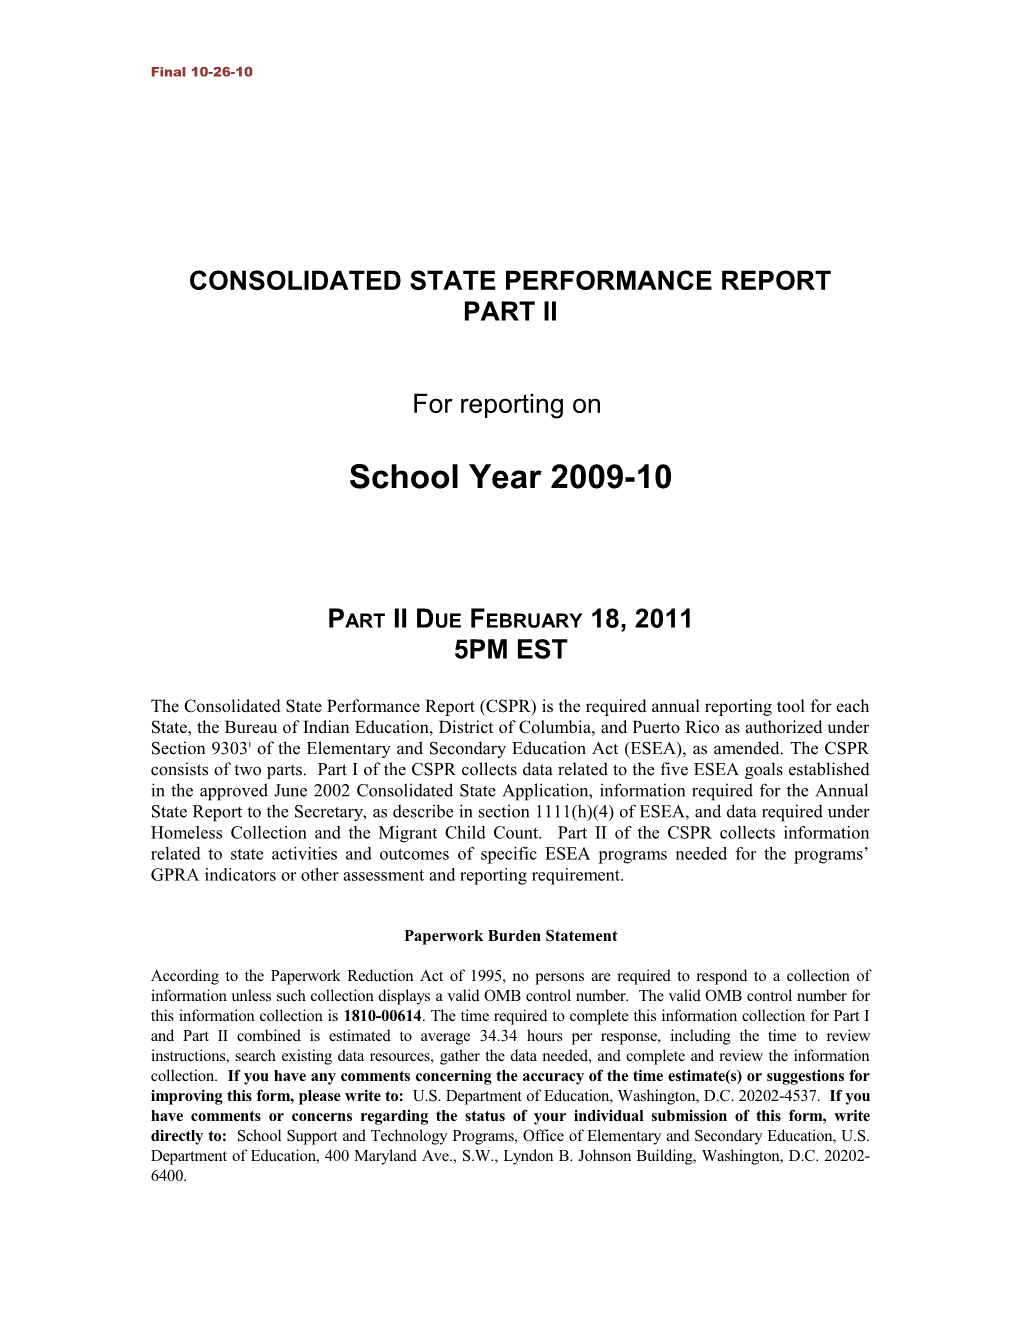 Consolidated State Performance Report: Part II for Reporting on School Year 2006-07 (MS Word)